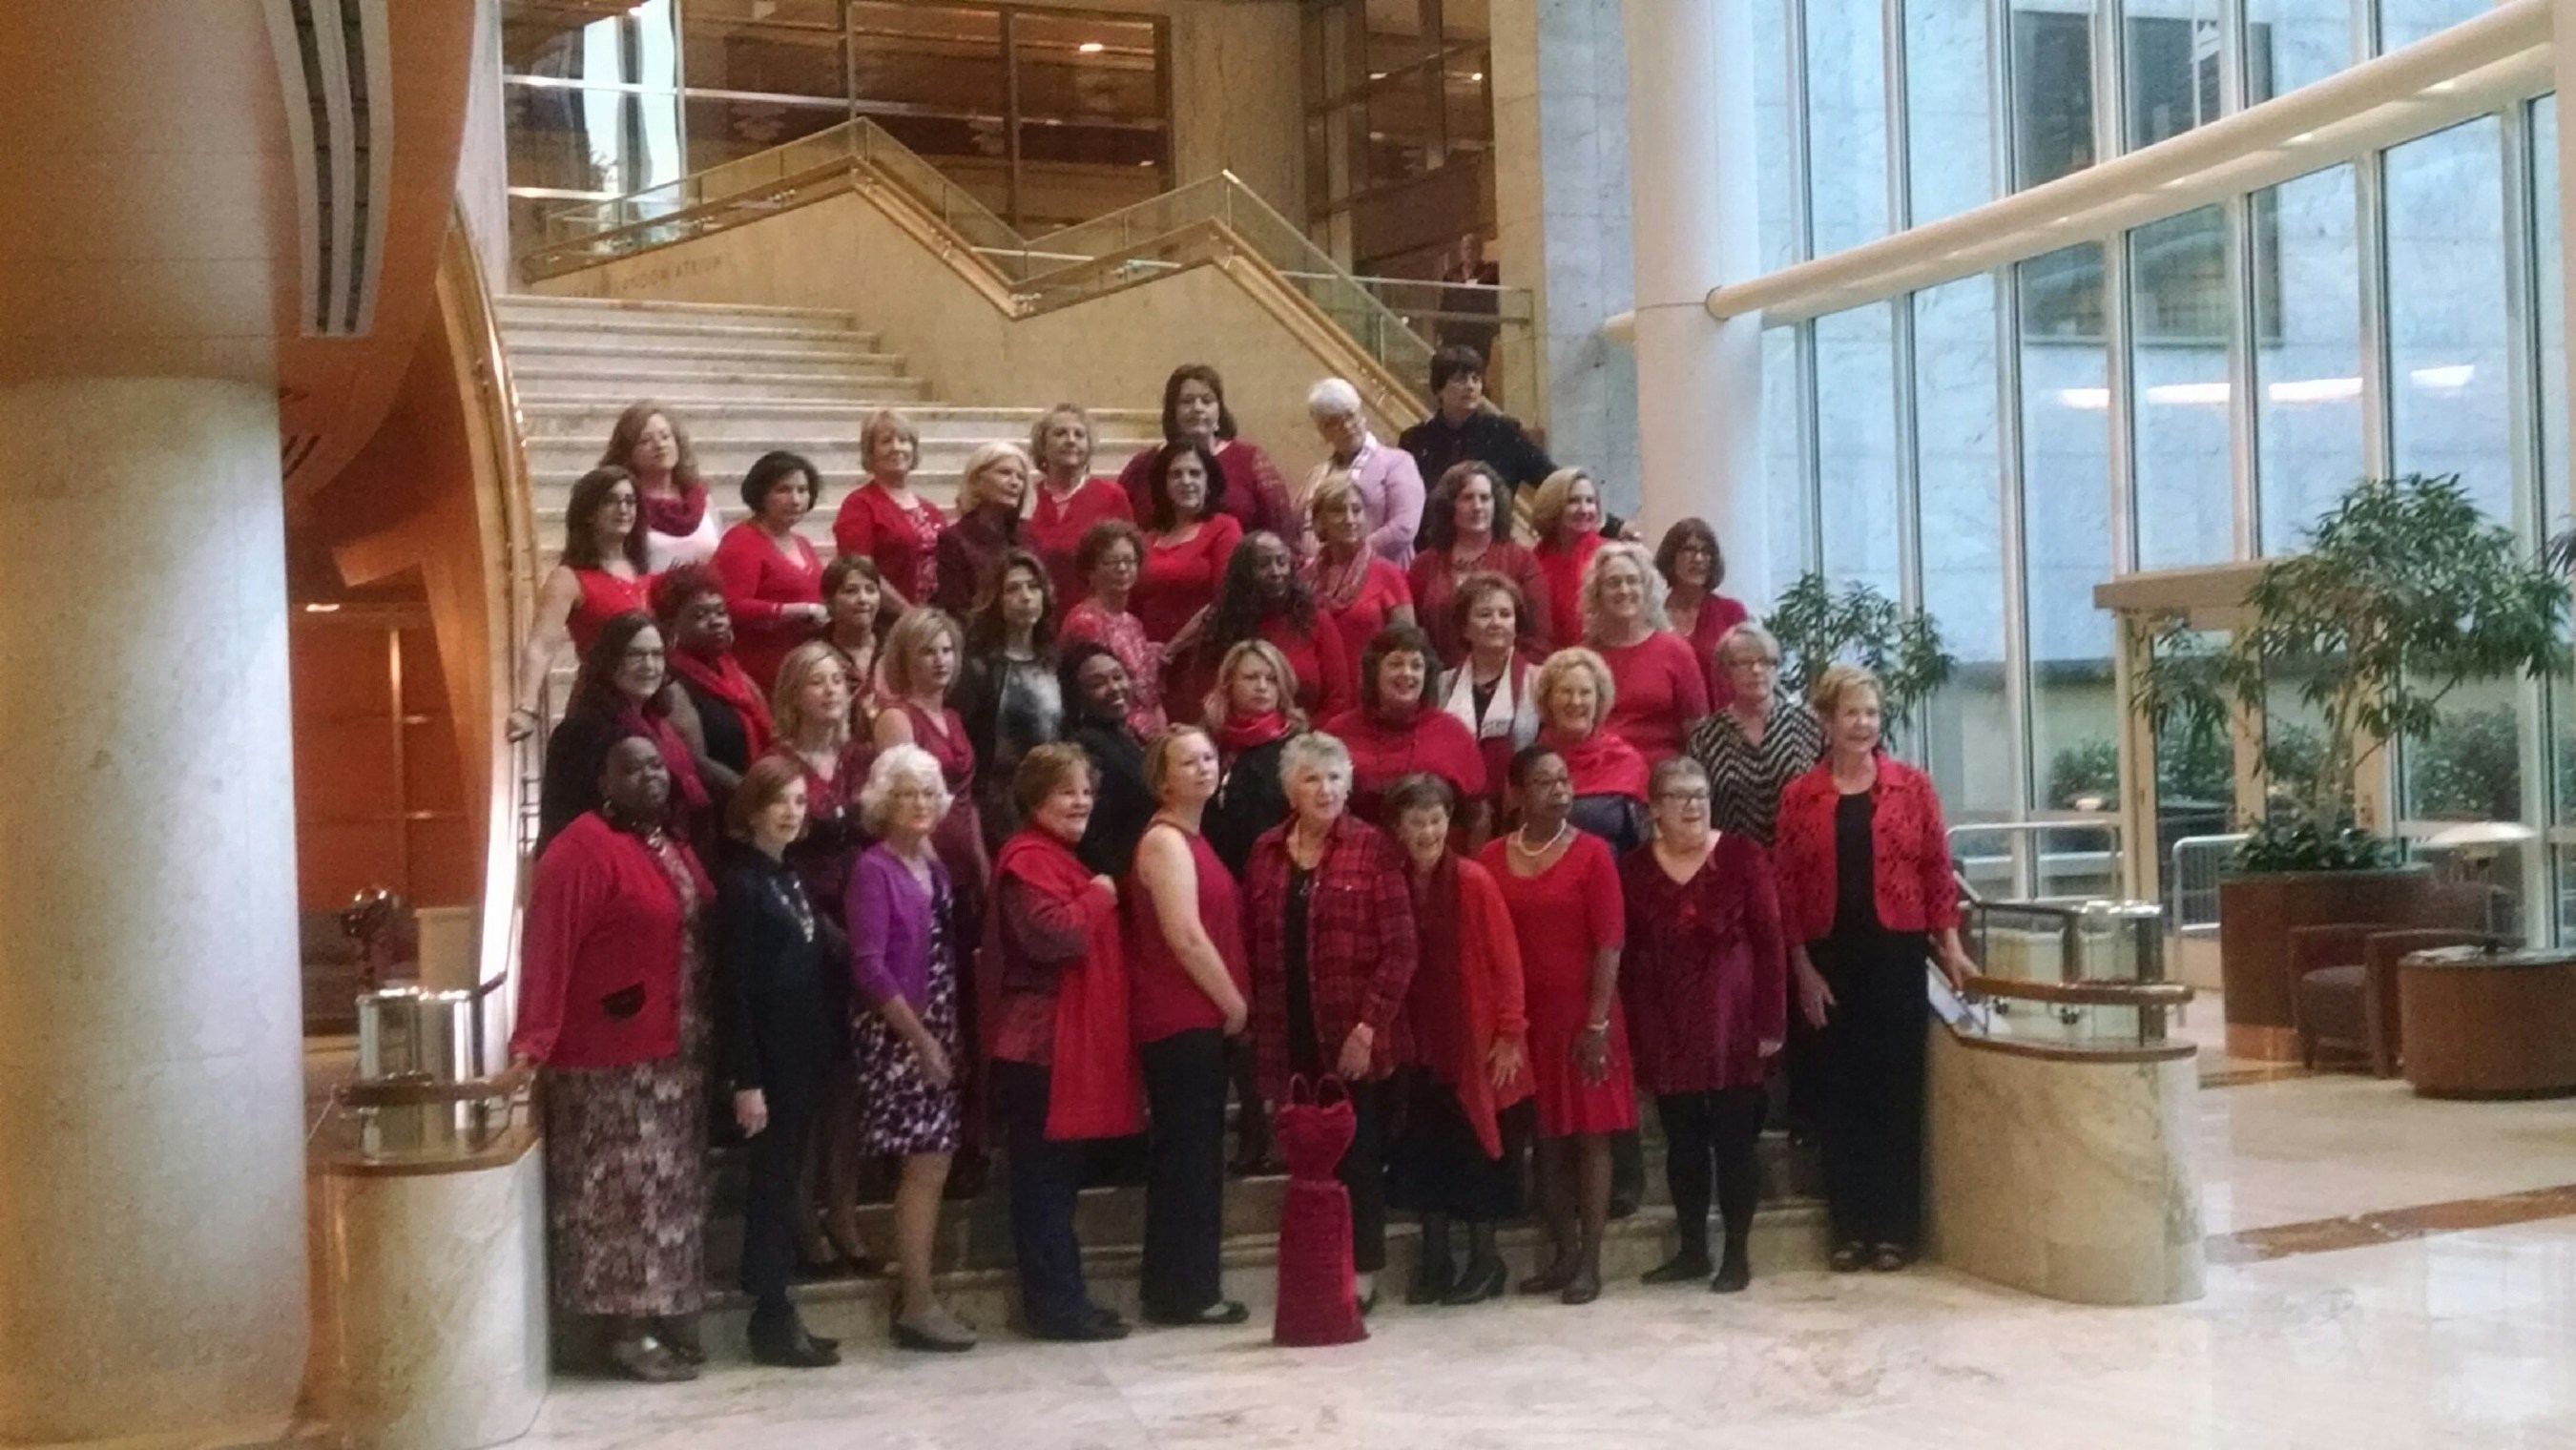 WomenHeart: The National Coalition for Women with Heart Disease announces that 39 women heart disease survivors graduate from the 15th Annual WomenHeart Science & Leadership Symposium at Mayo Clinic to join the National Corps of 788 WomenHeart Champions